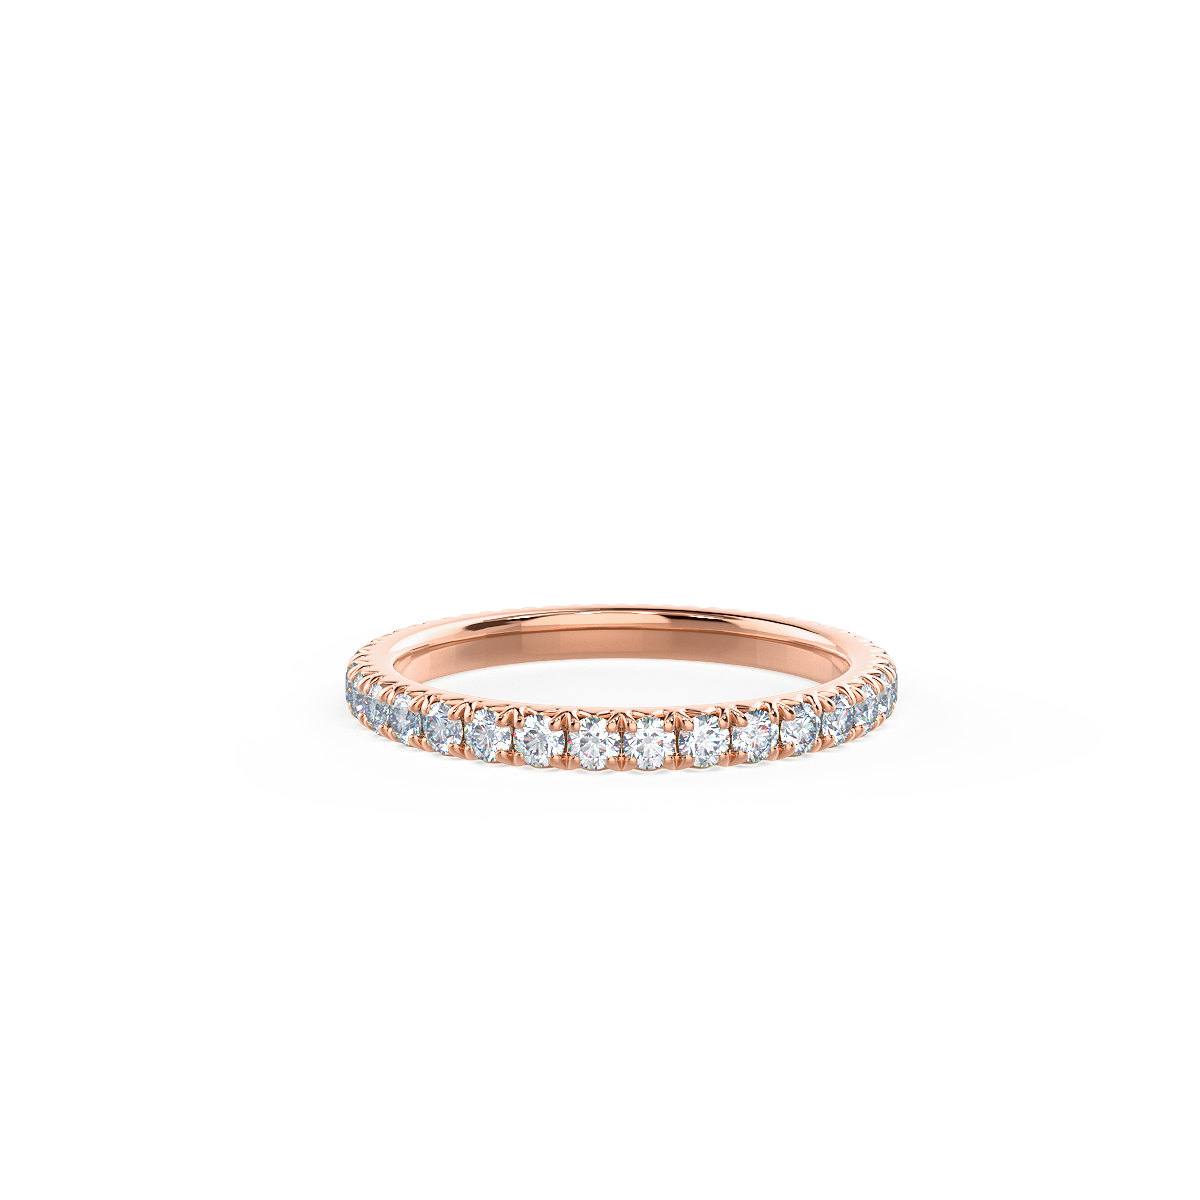 FRENCH PAVÉ ETERNITY BAND